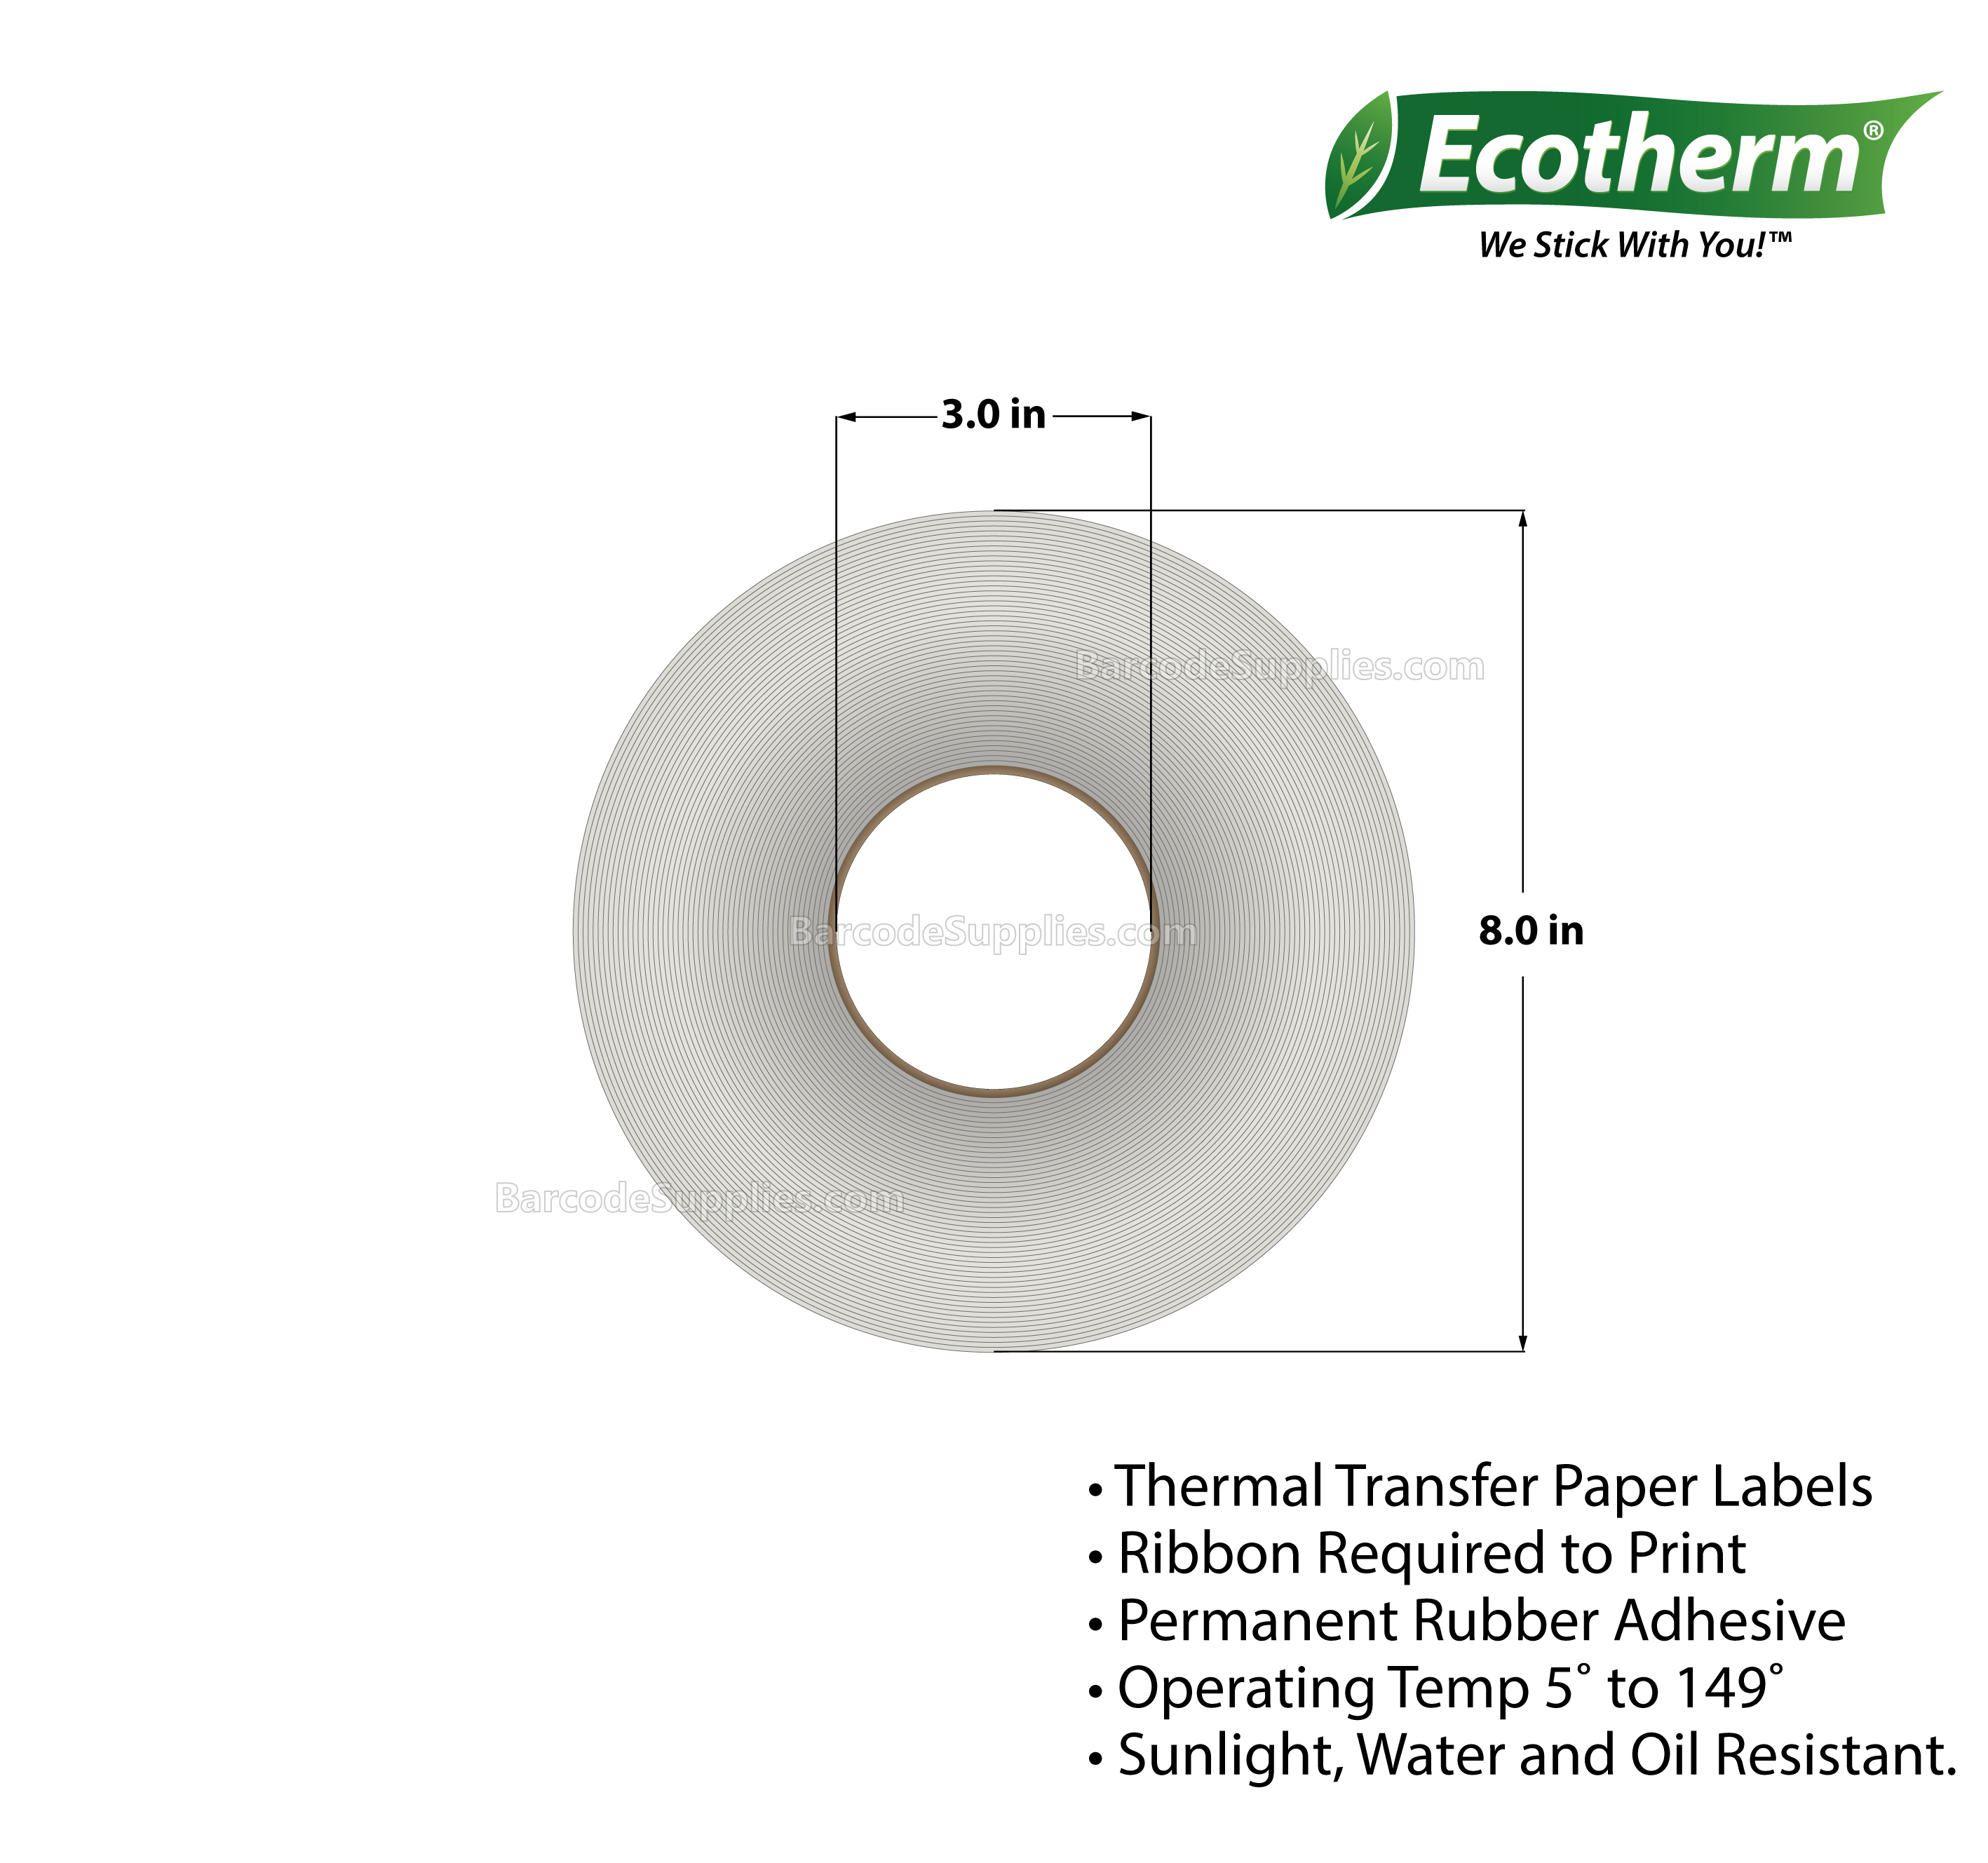 2 x 1 Thermal Transfer White Labels With Rubber Adhesive - Perforated - 11000 Labels Per Roll - Carton Of 4 Rolls - 44000 Labels Total - MPN: ECOTHERM28110-4